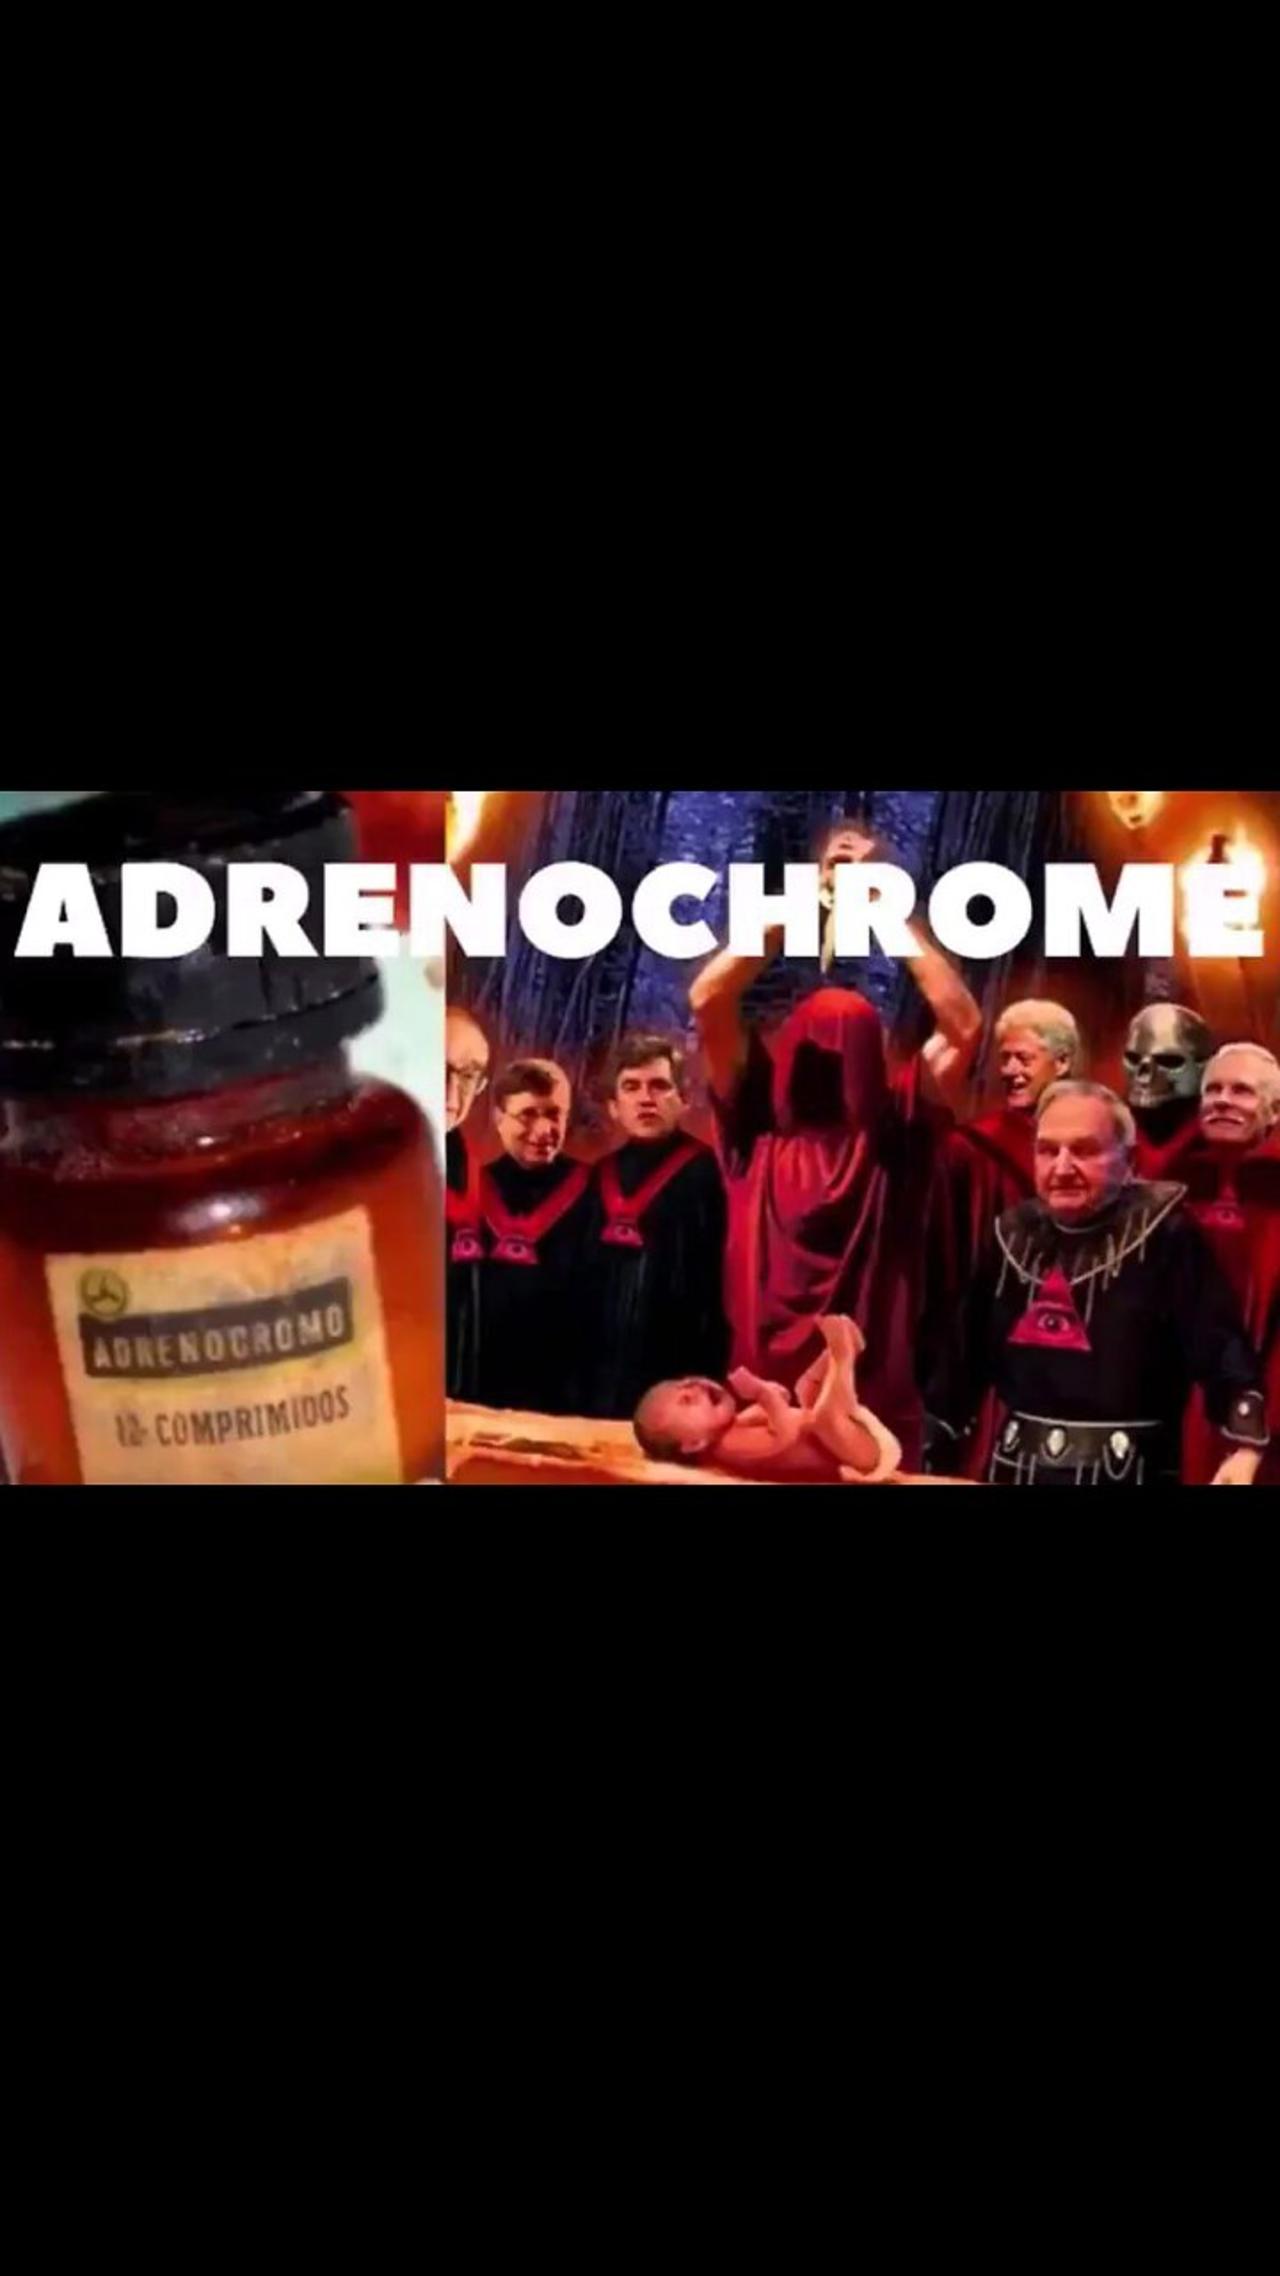 The Red ADRENOCHROME Rings